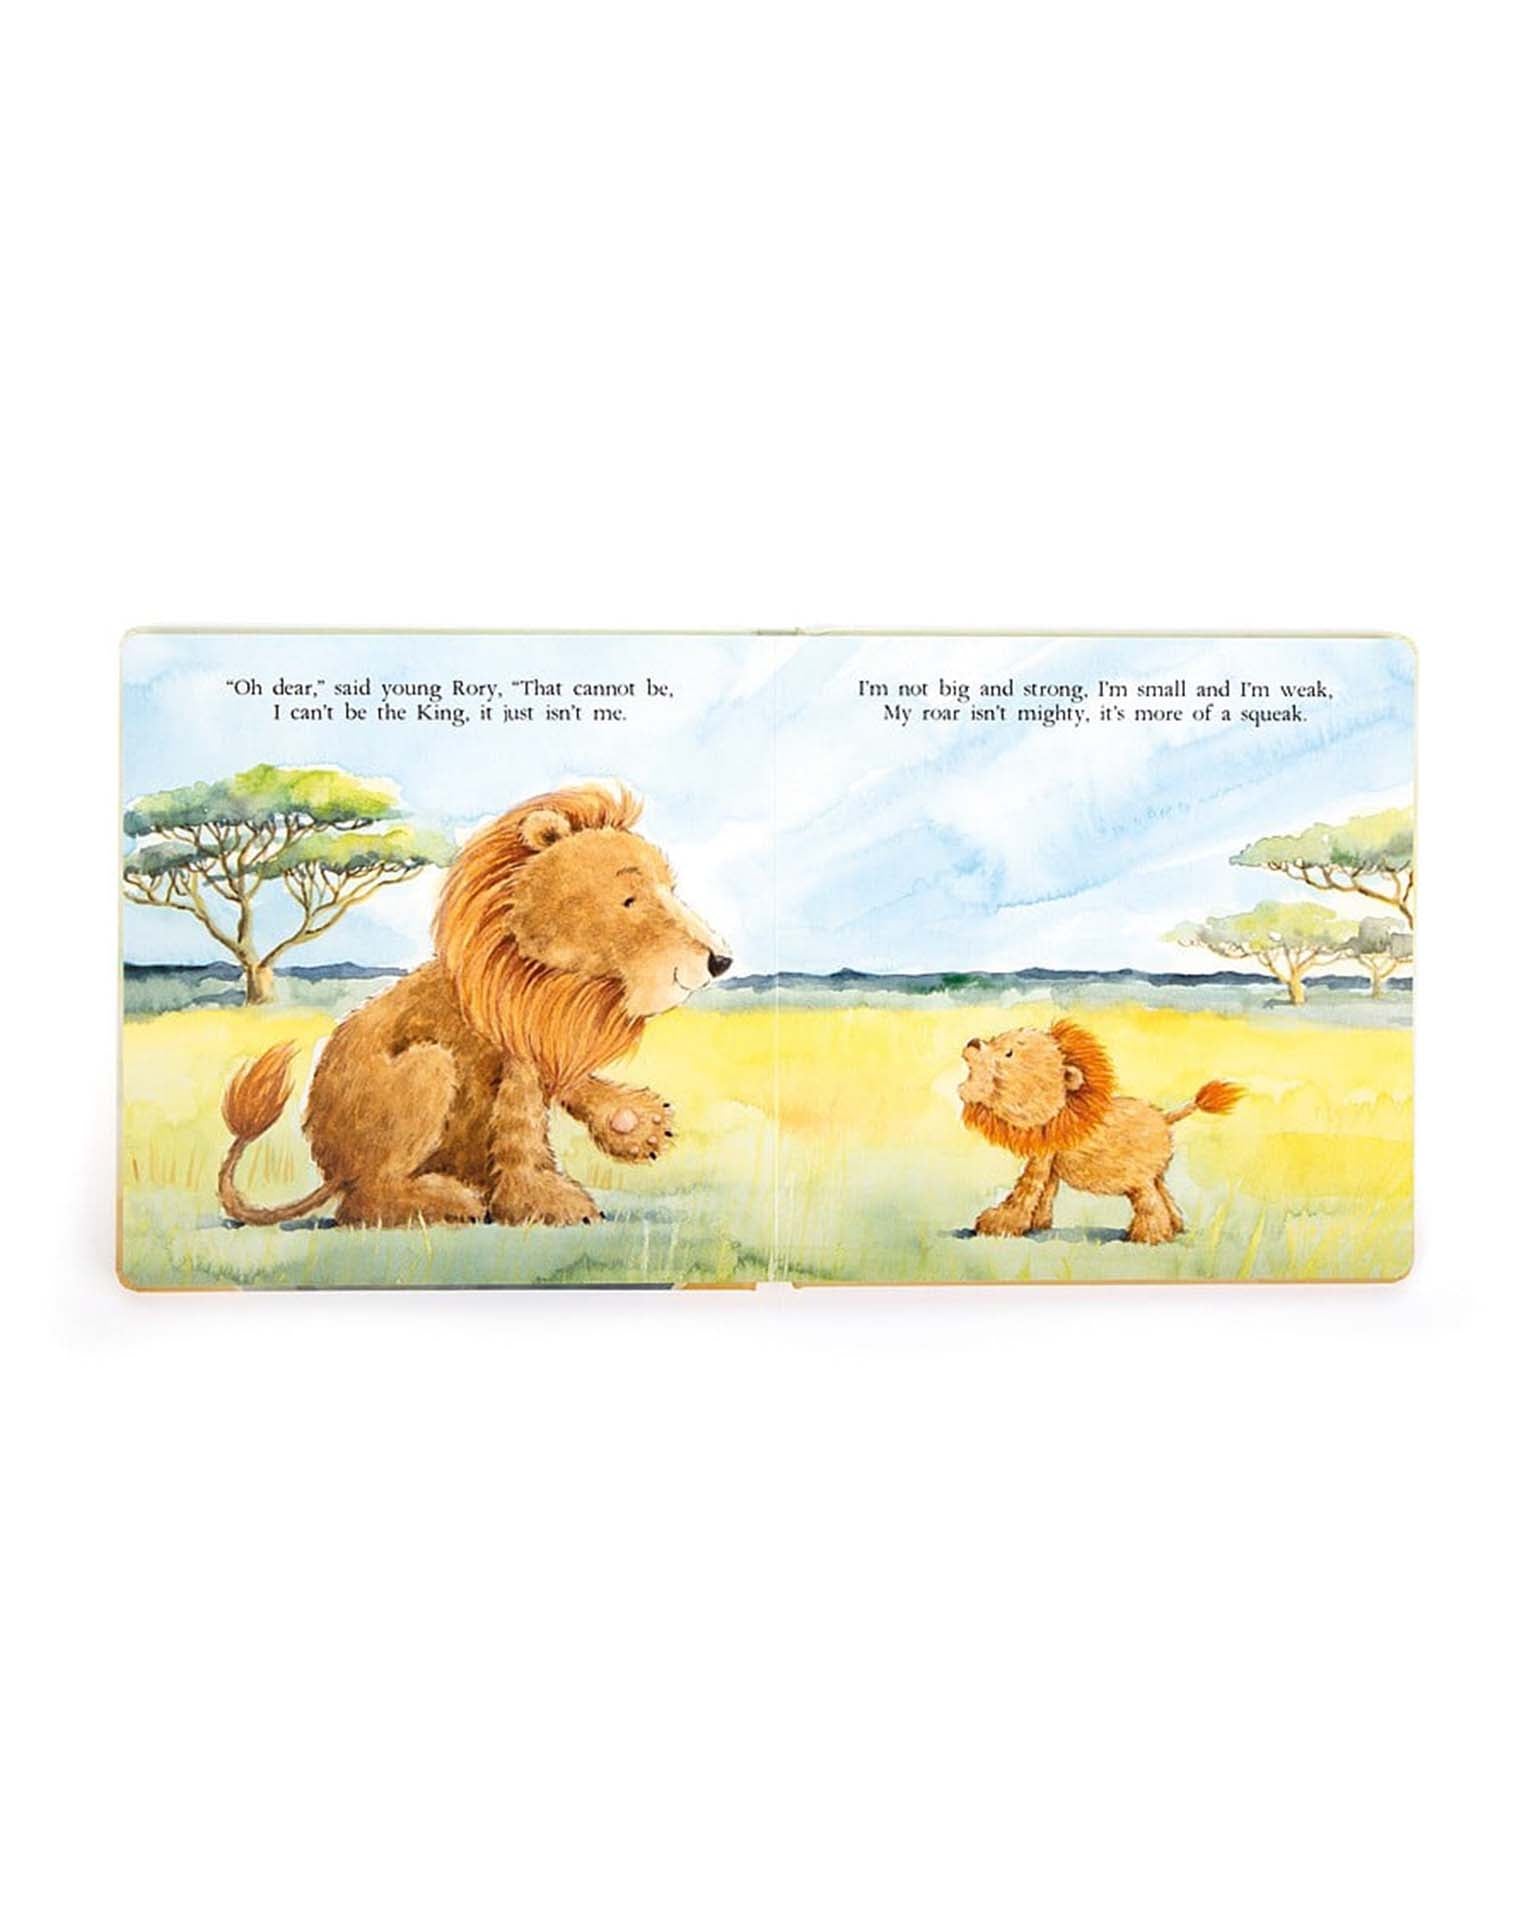 Little jellycat play the very brave lion book